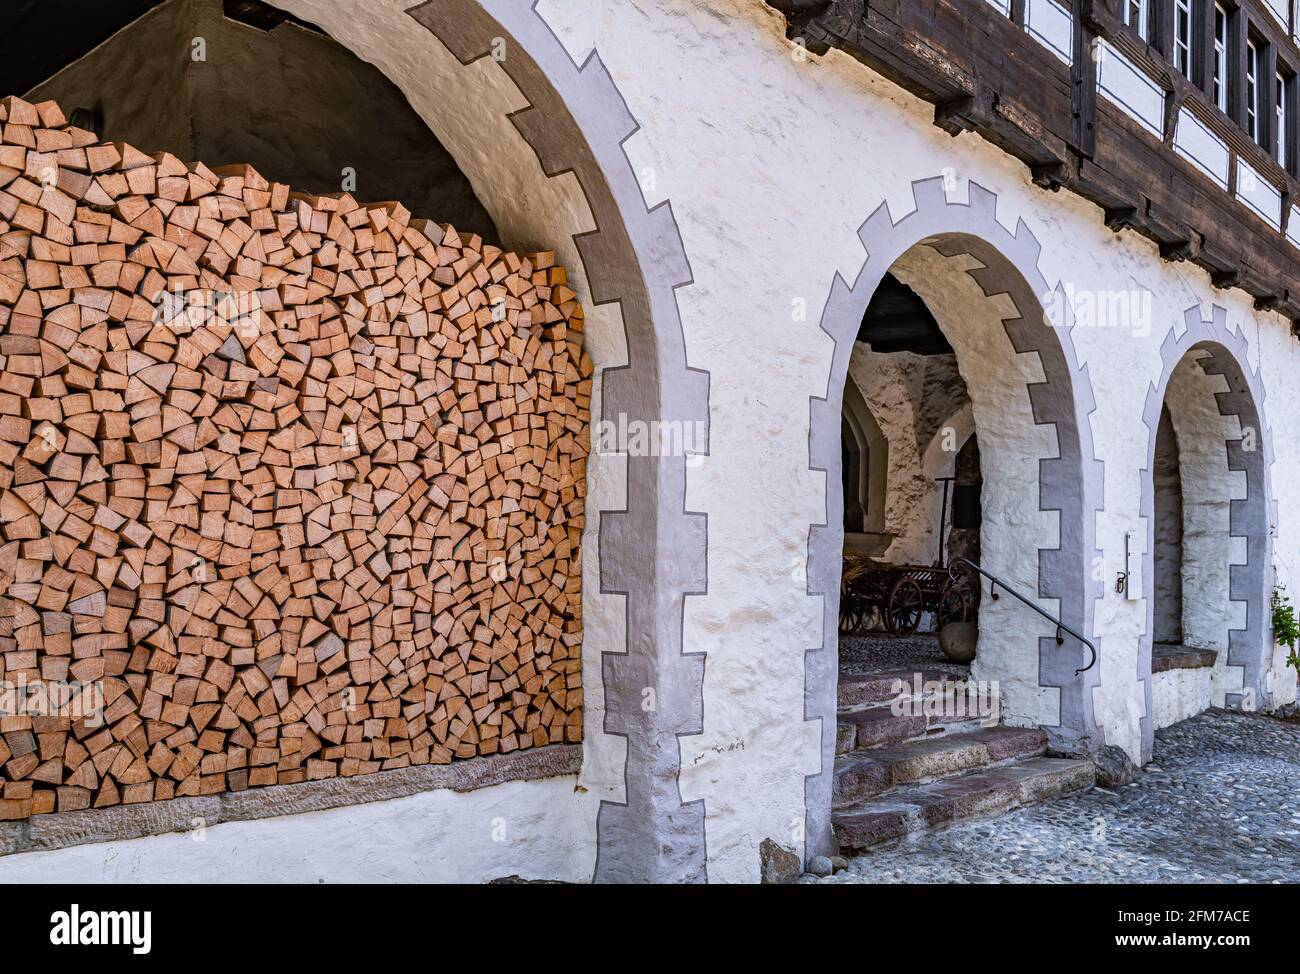 A stack of firewood under the arch of the traditional medieval house of Werdenberg, Switzerland Stock Photo